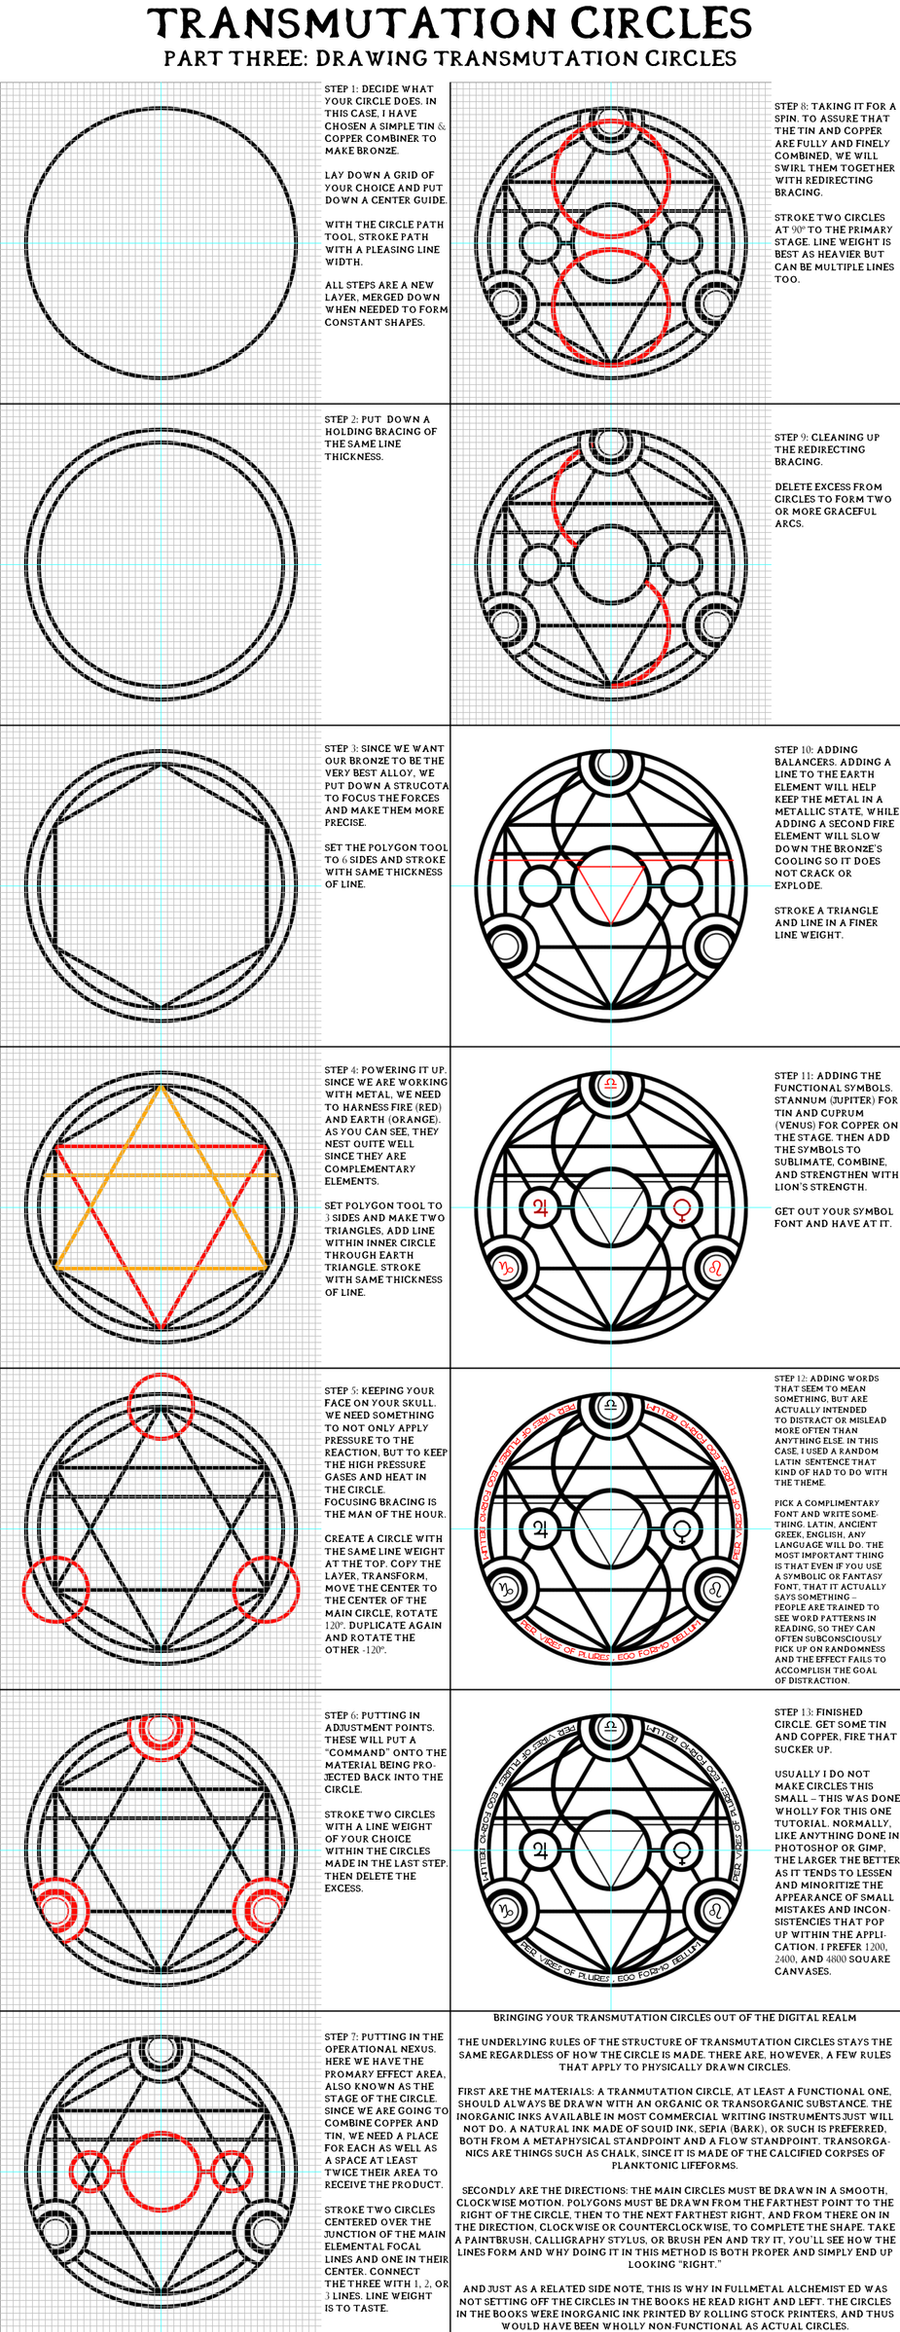 trans__circle_tut__by_exxos_p3_by_greenlover77777.png